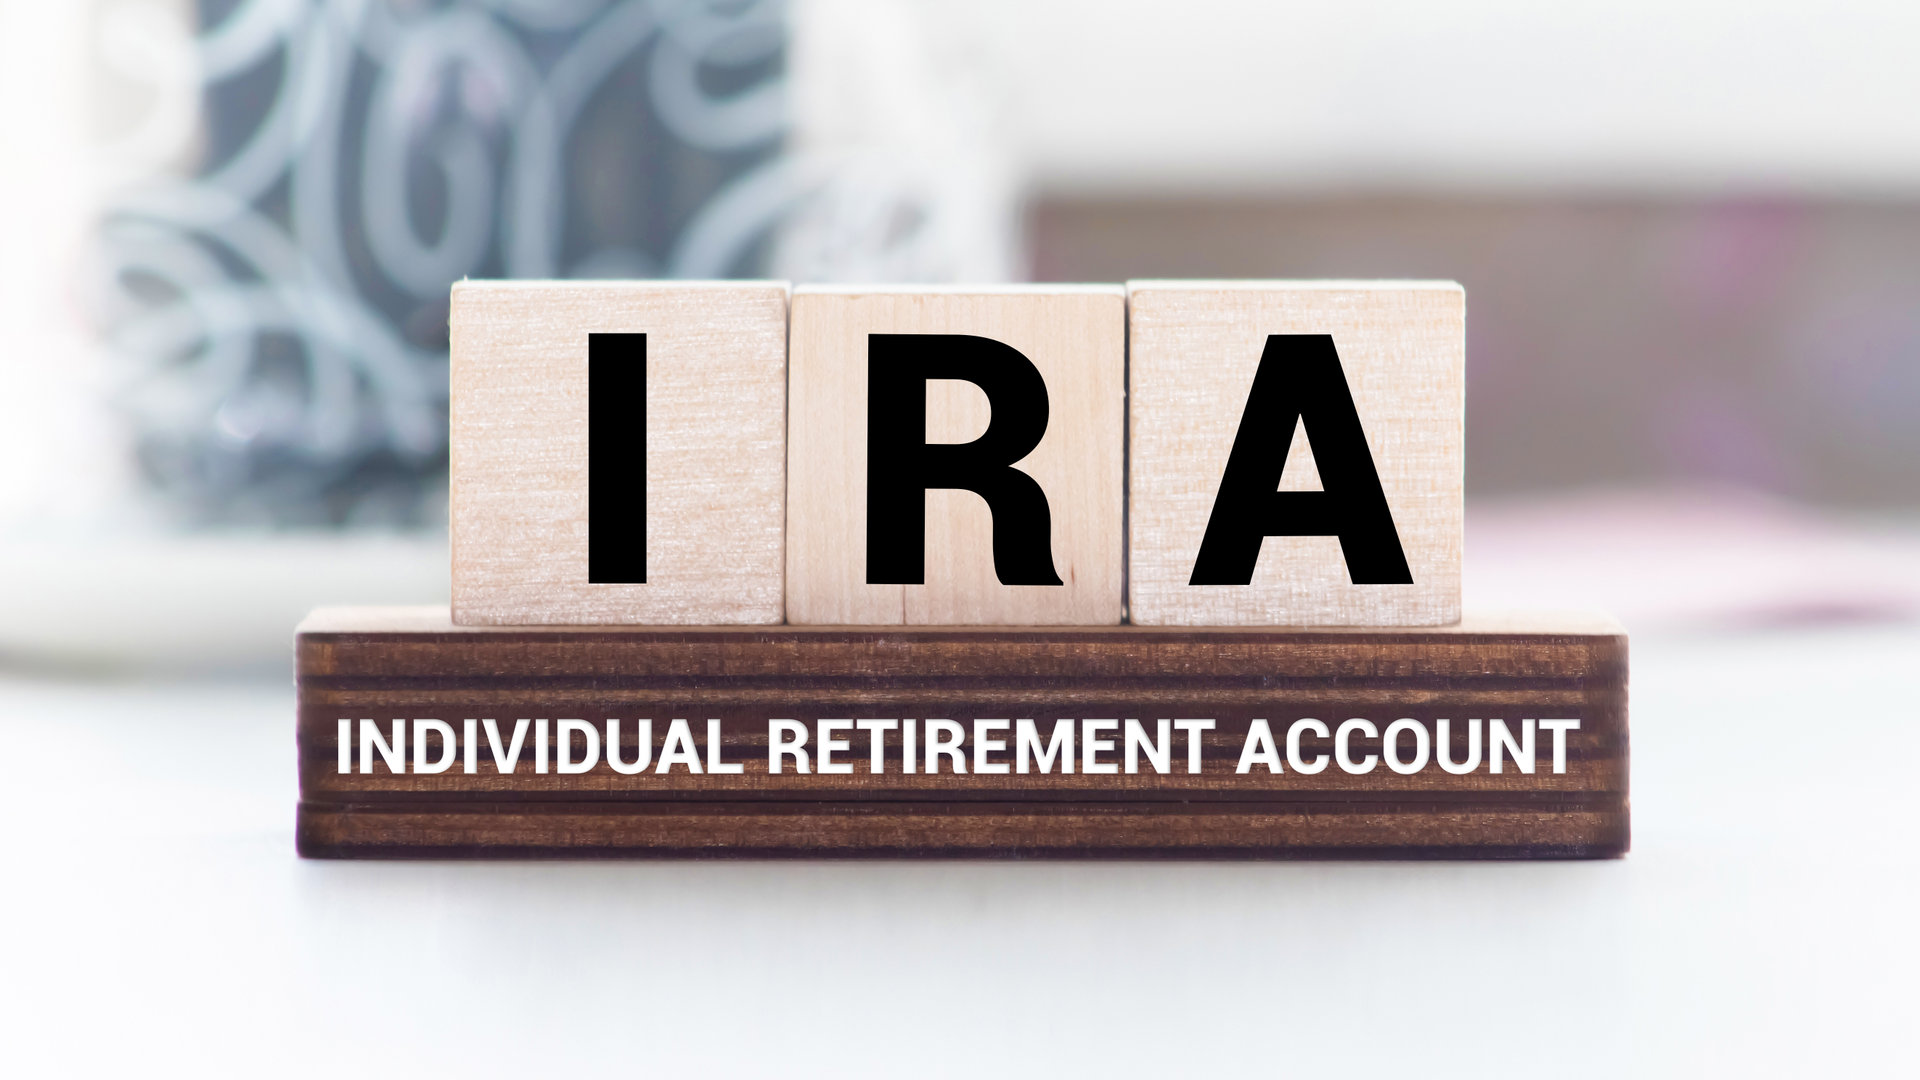 IRA individual retirement account word on wood cube block with blue background.